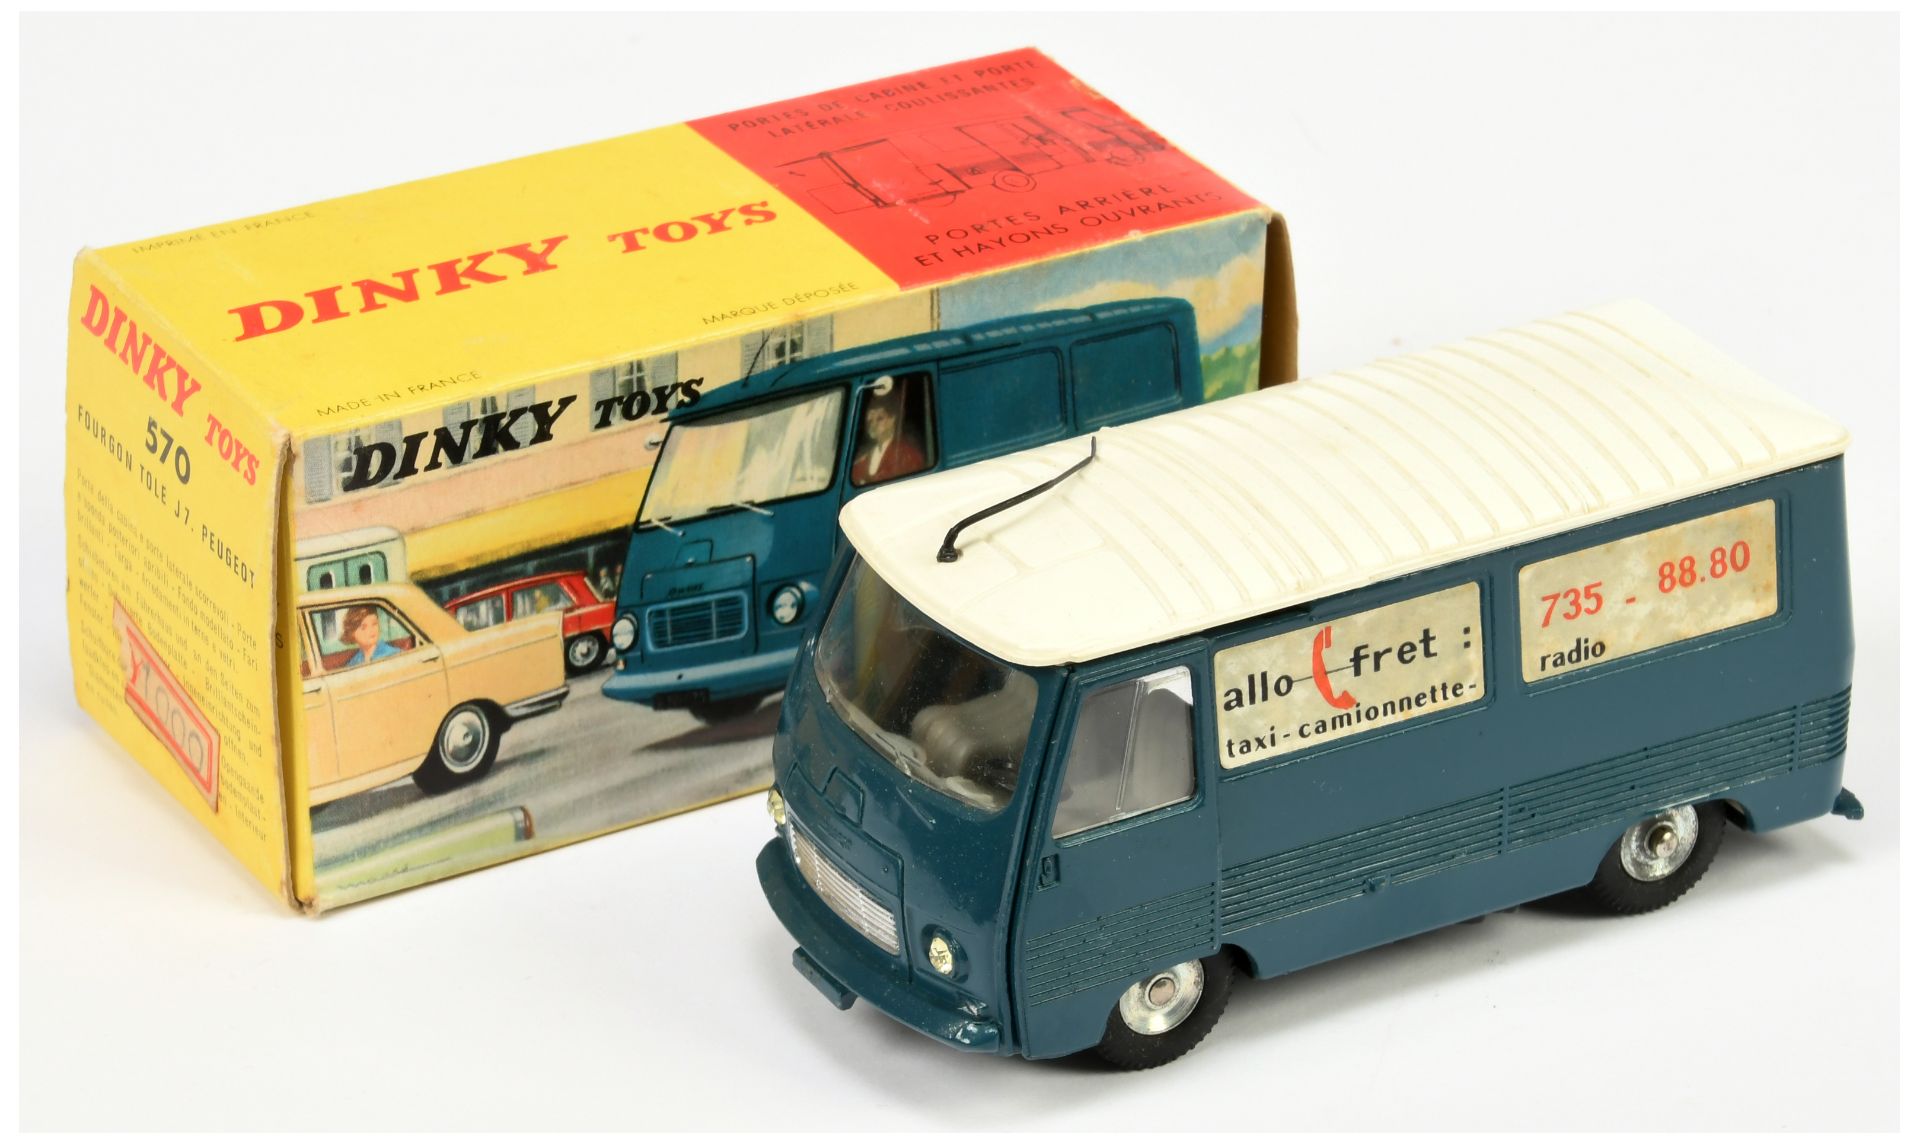 Dinky Toys 570 Peugeot J7 van  - Blue body, white roof with aerial, grey interior, silver trim an...